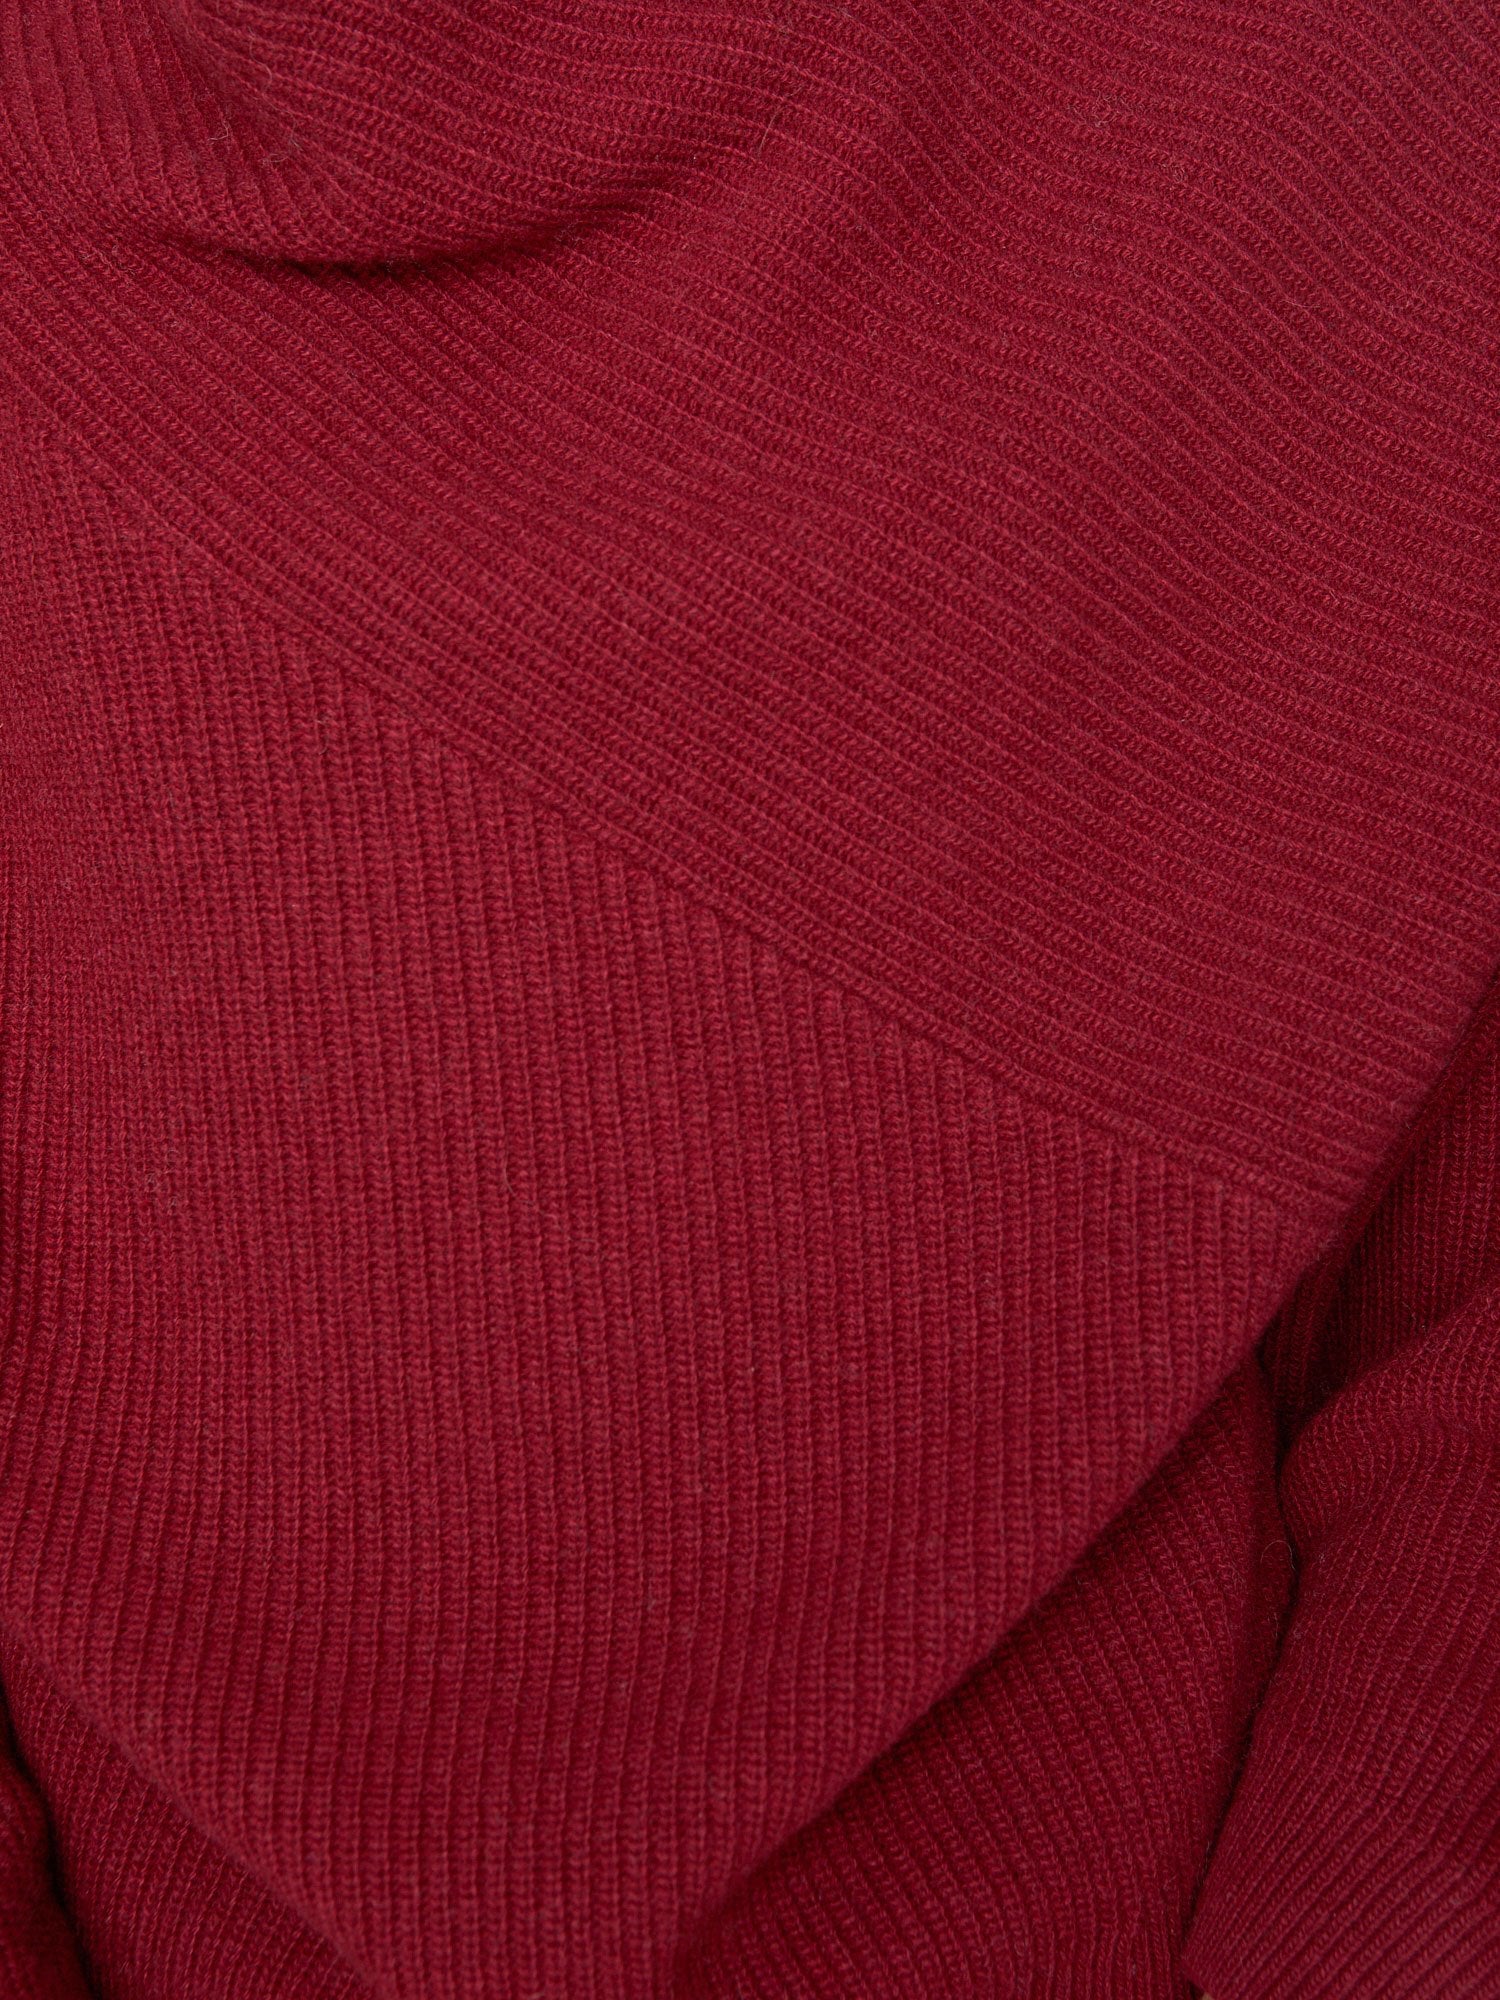 The Leith Sweater